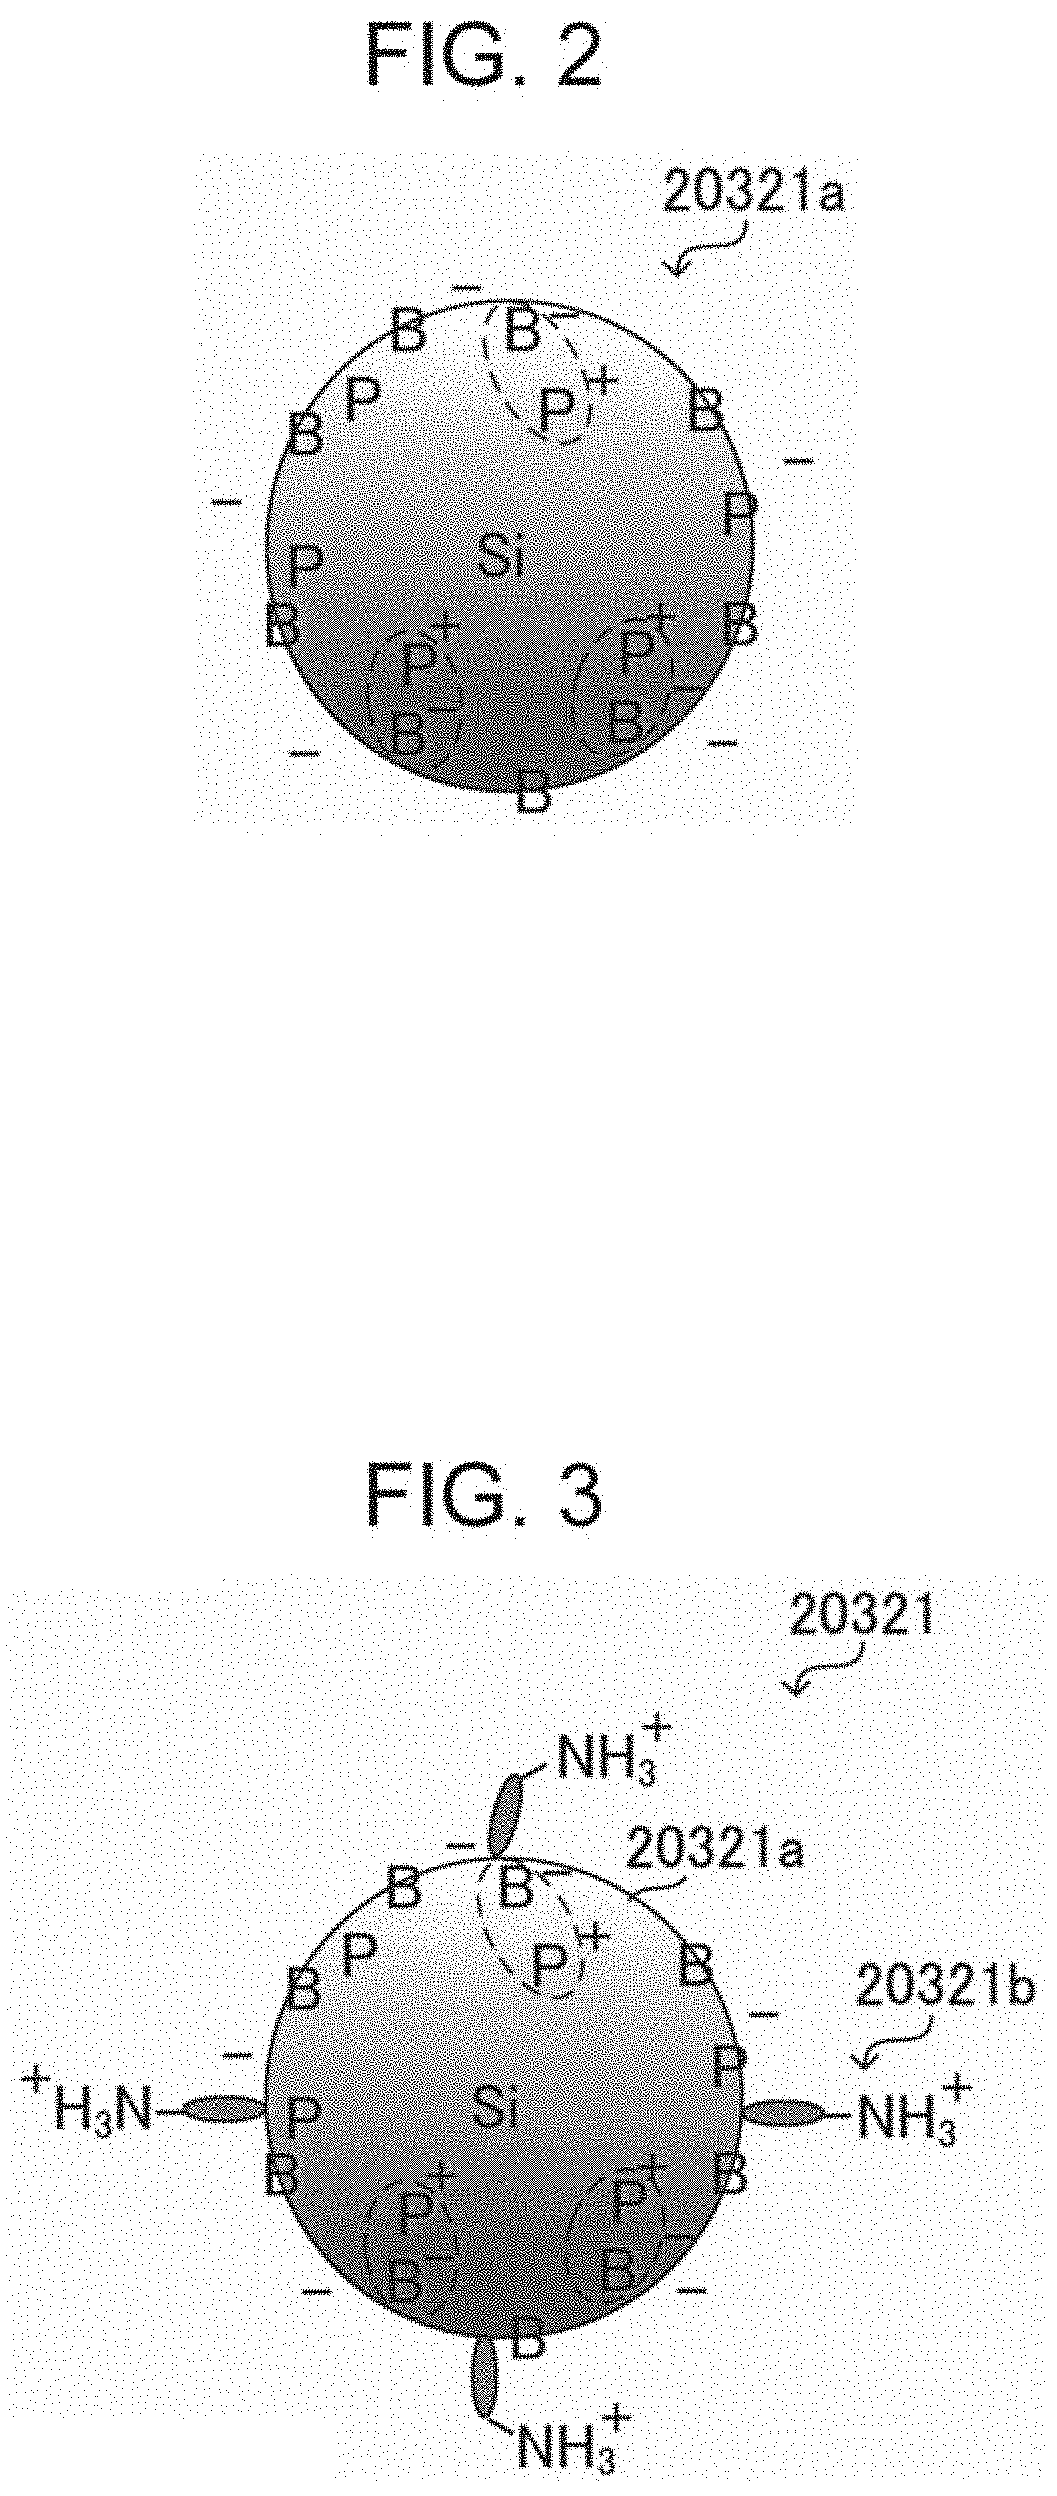 Complex and detection device